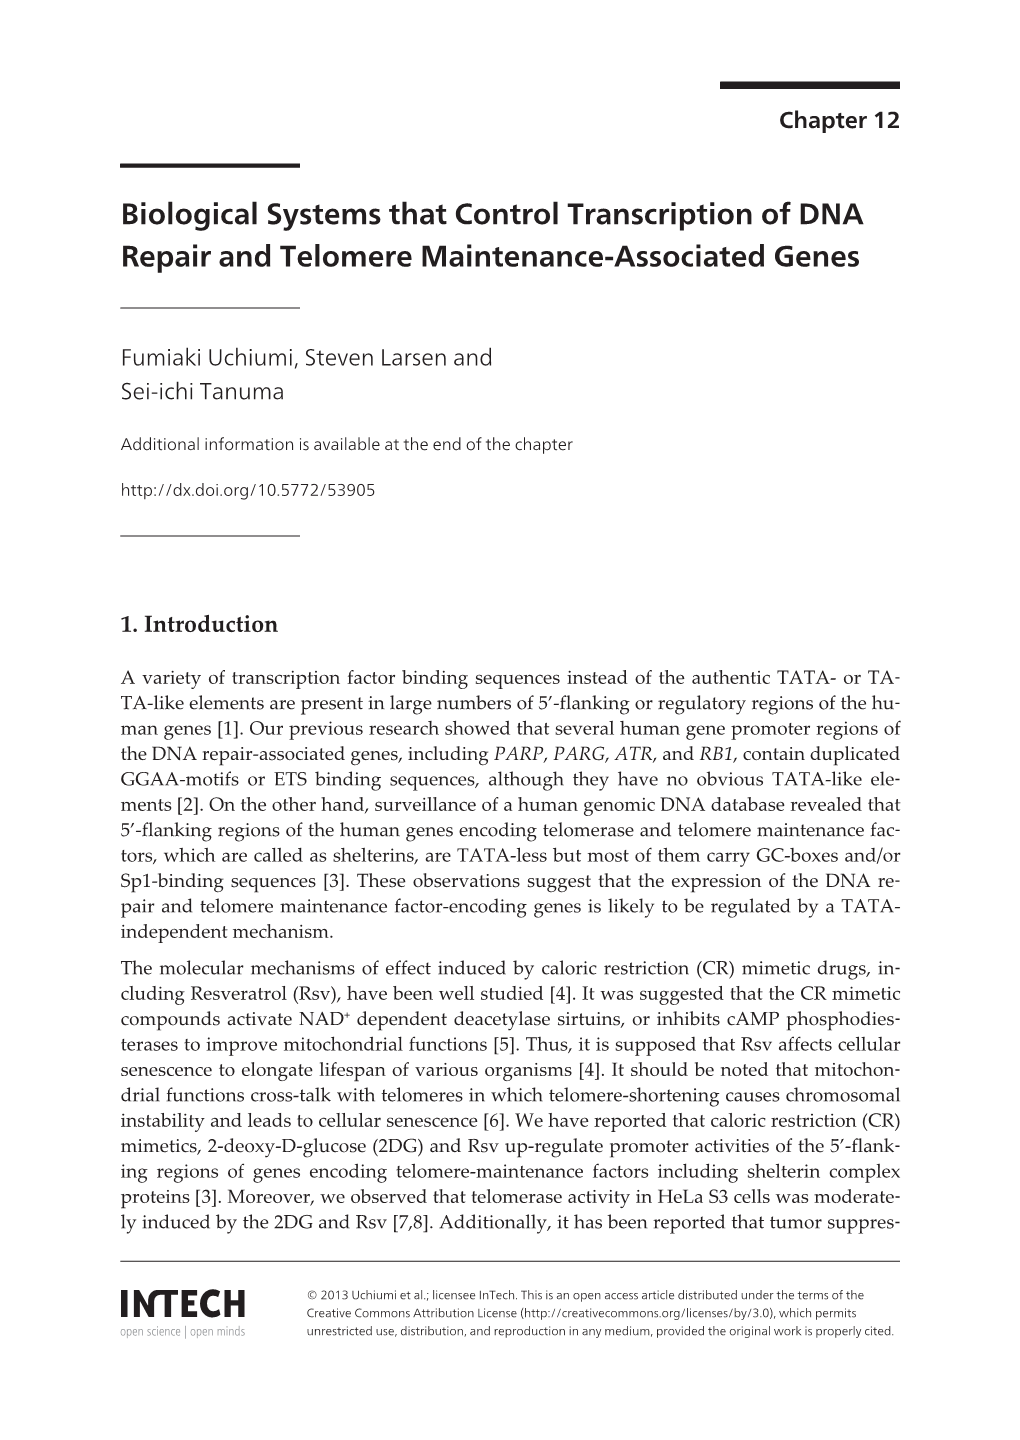 Biological Systems That Control Transcription of DNA Repair and Telomere Maintenance-Associated Genes